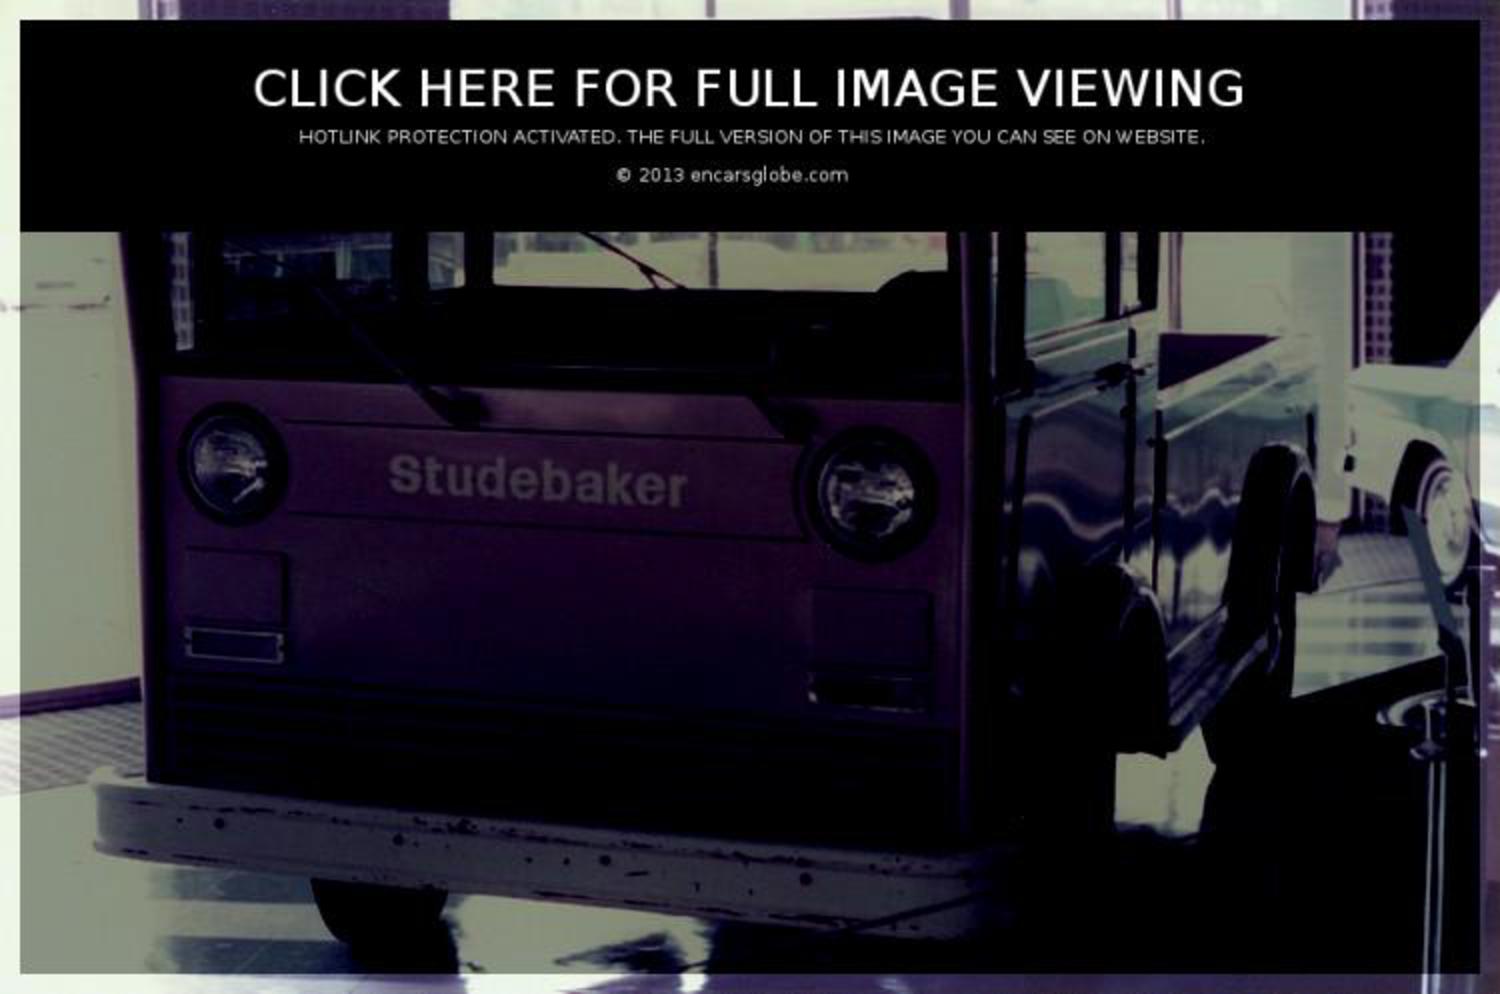 Studebaker Prototype Truck Photo Gallery: Photo #04 out of 11 ...